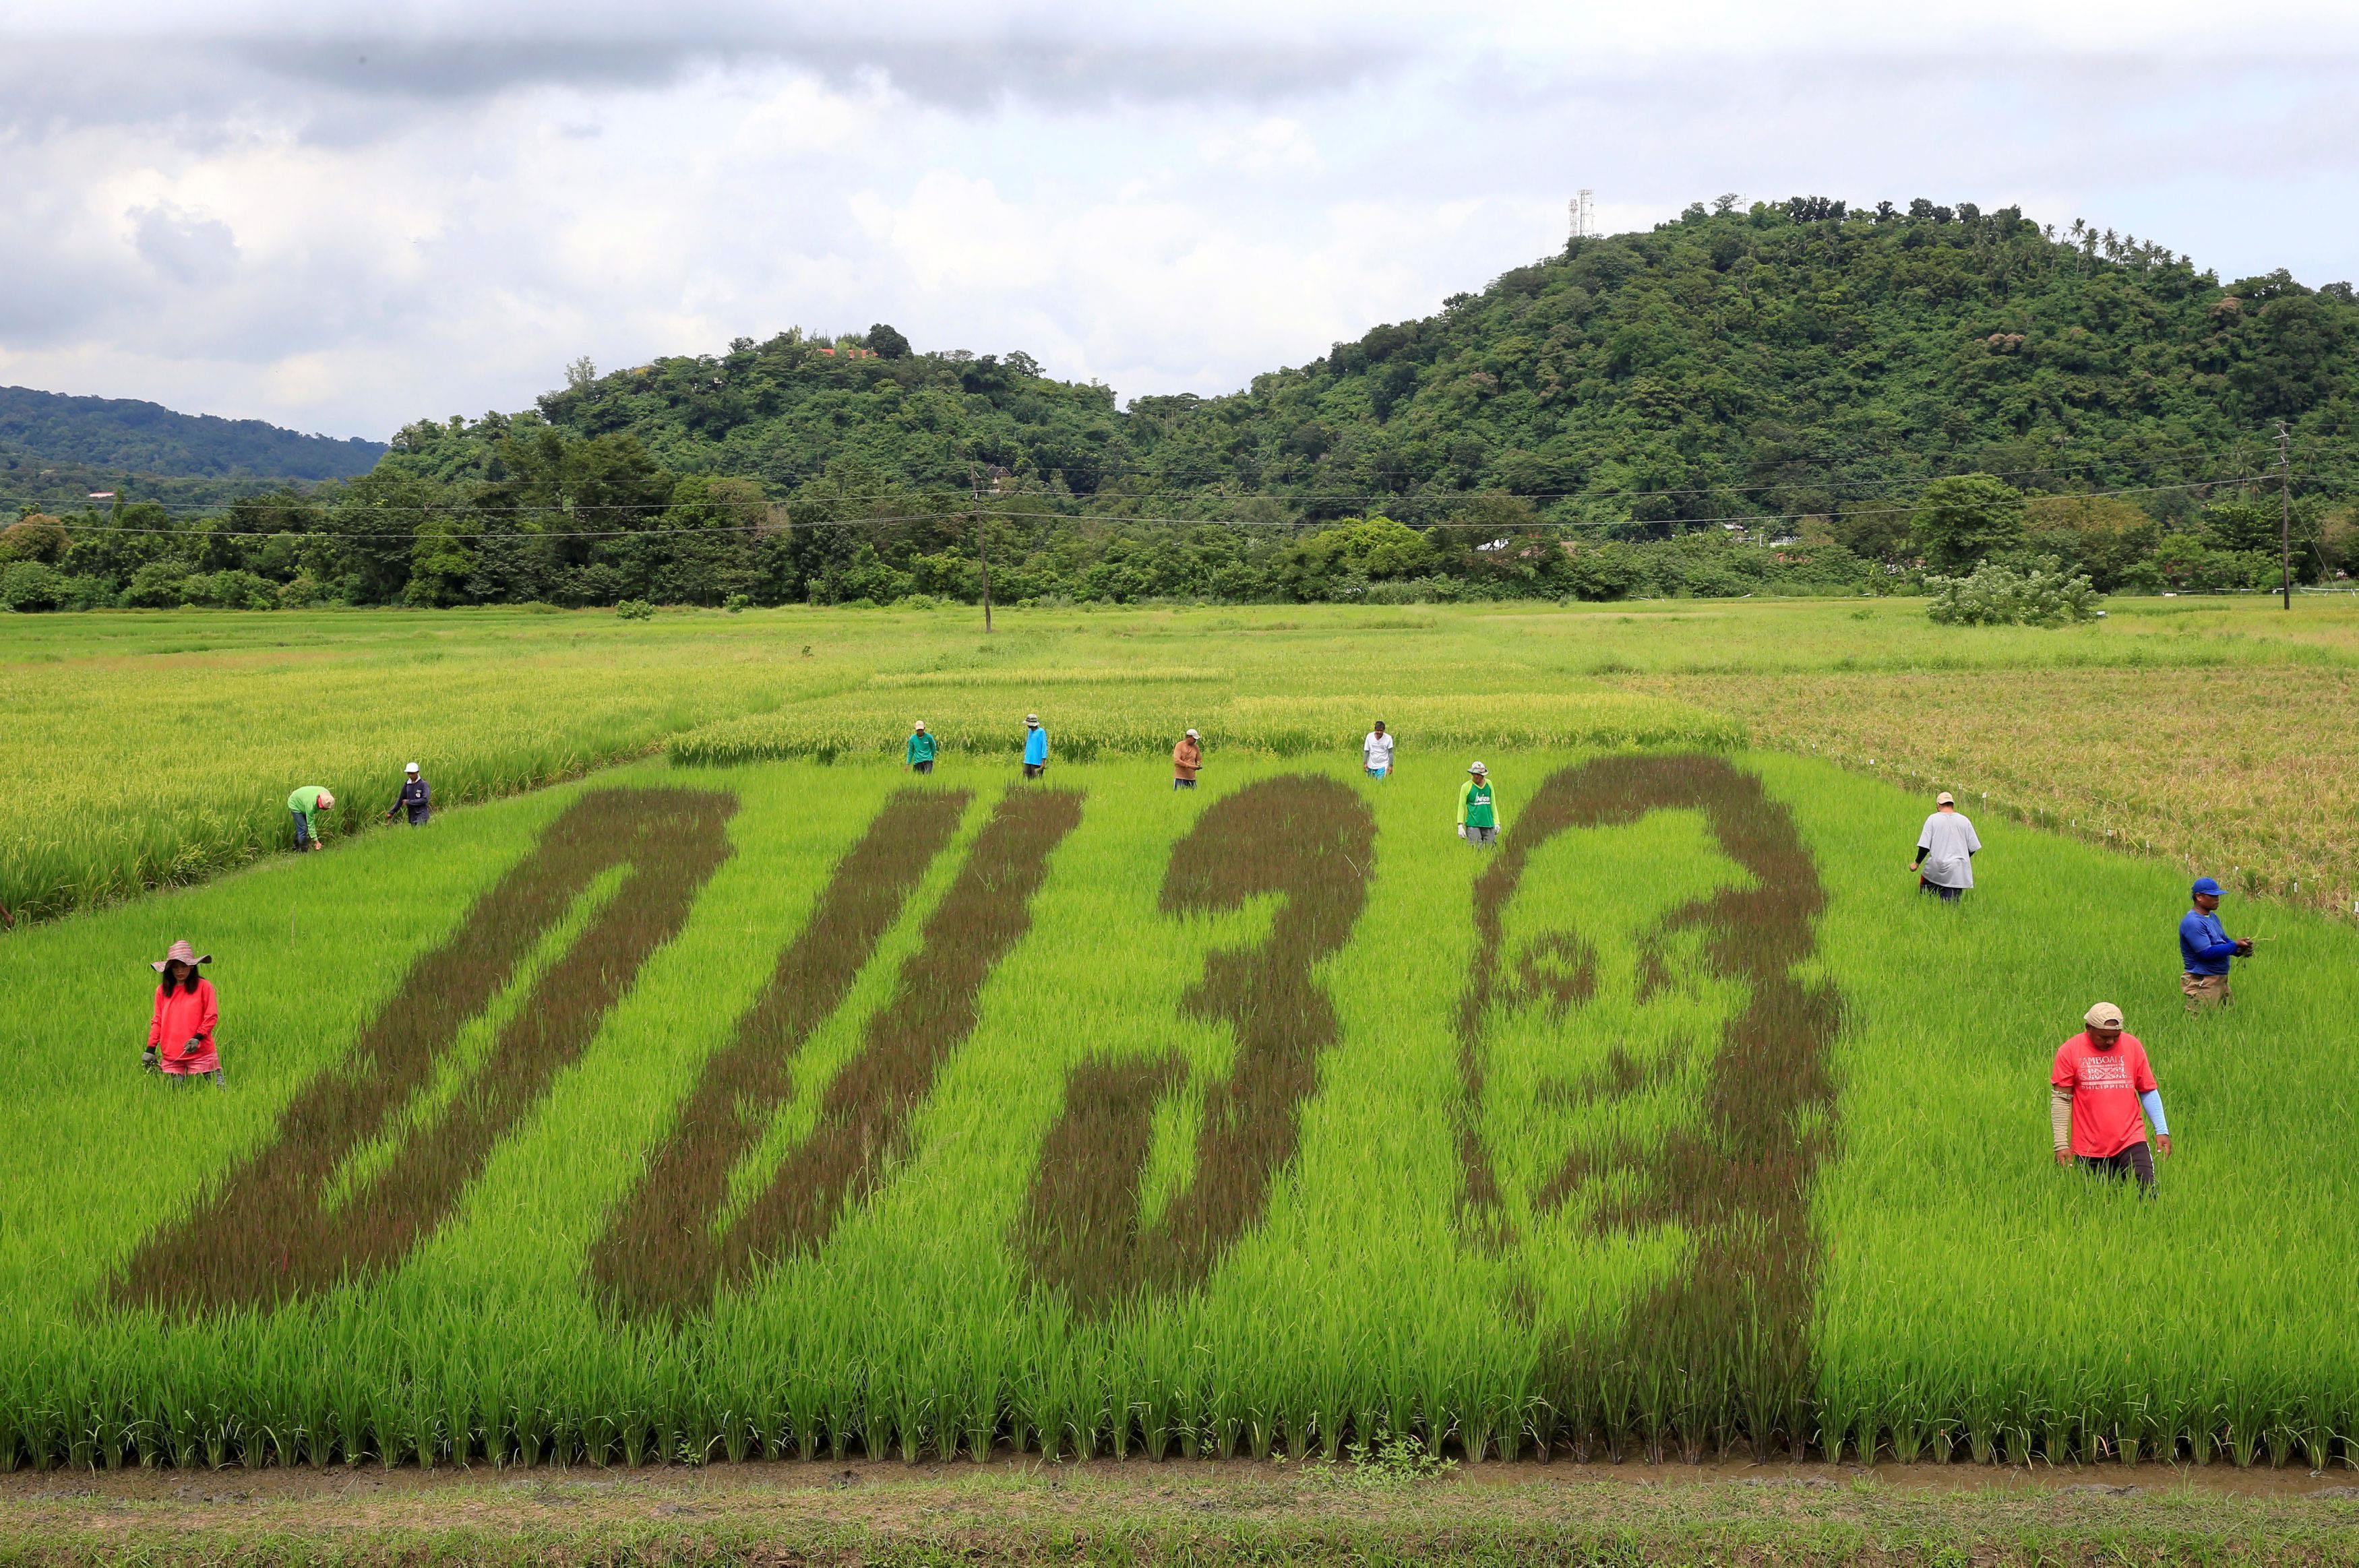 An artwork featuring image Philippine President Duterte on rice paddy in Los Banos city, Laguna prov